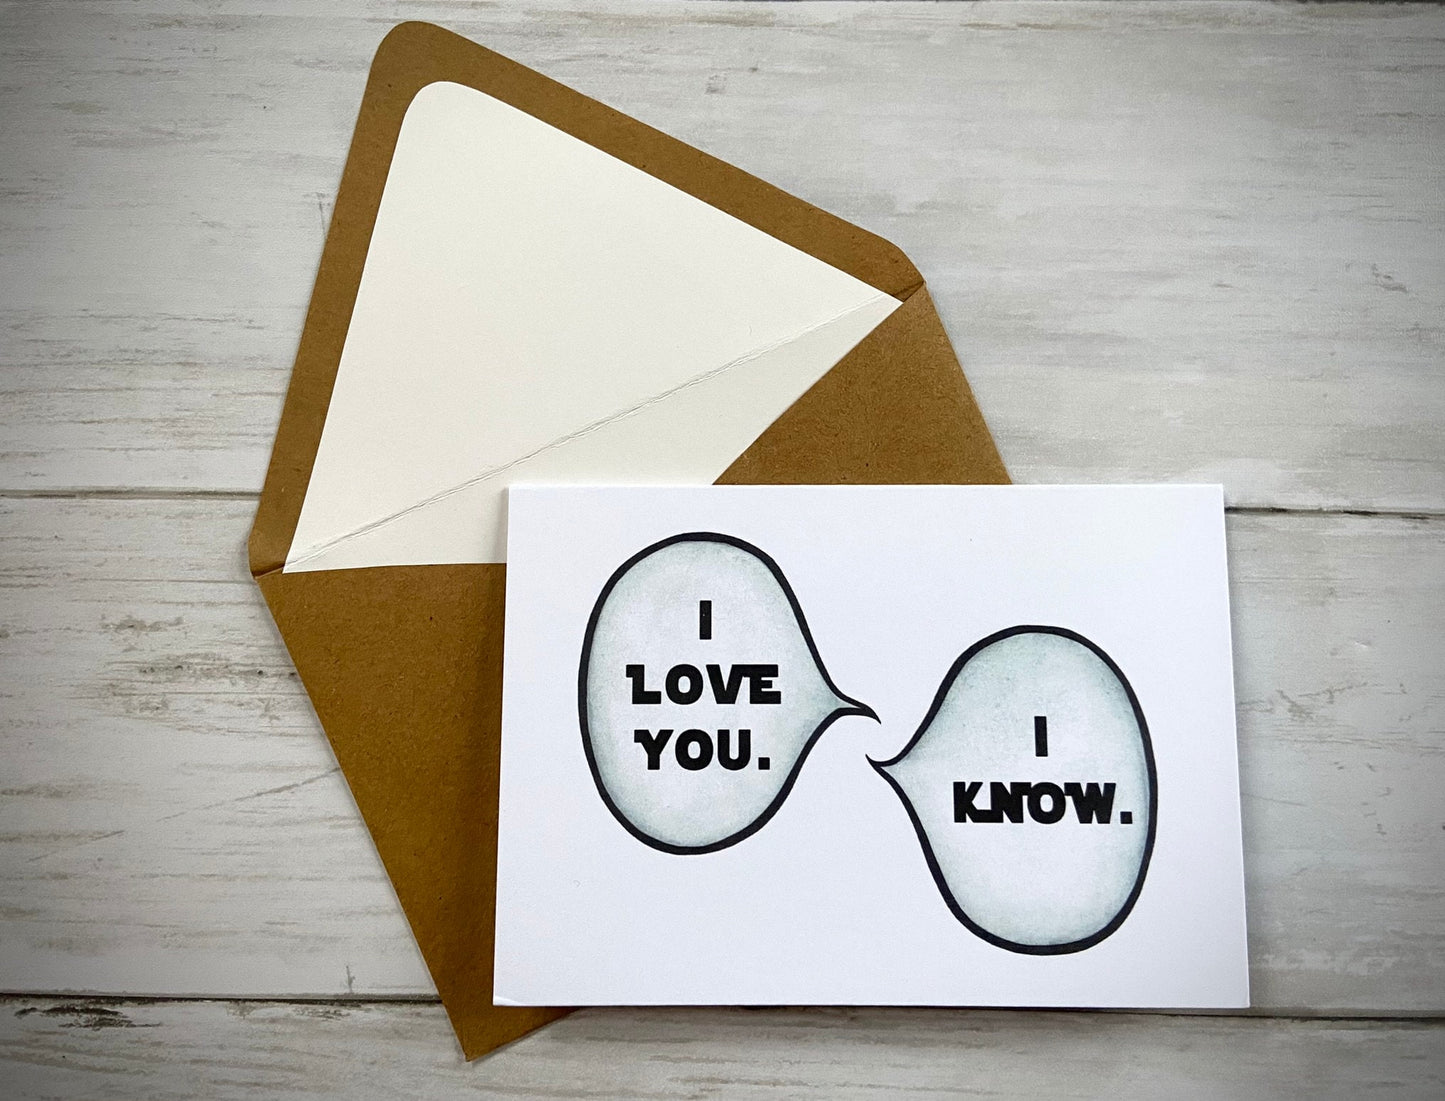 Blank Note Card | Star Wars - I Love You, I Know Notecard | Watercolor Note Card | Star Wars Greeting Card